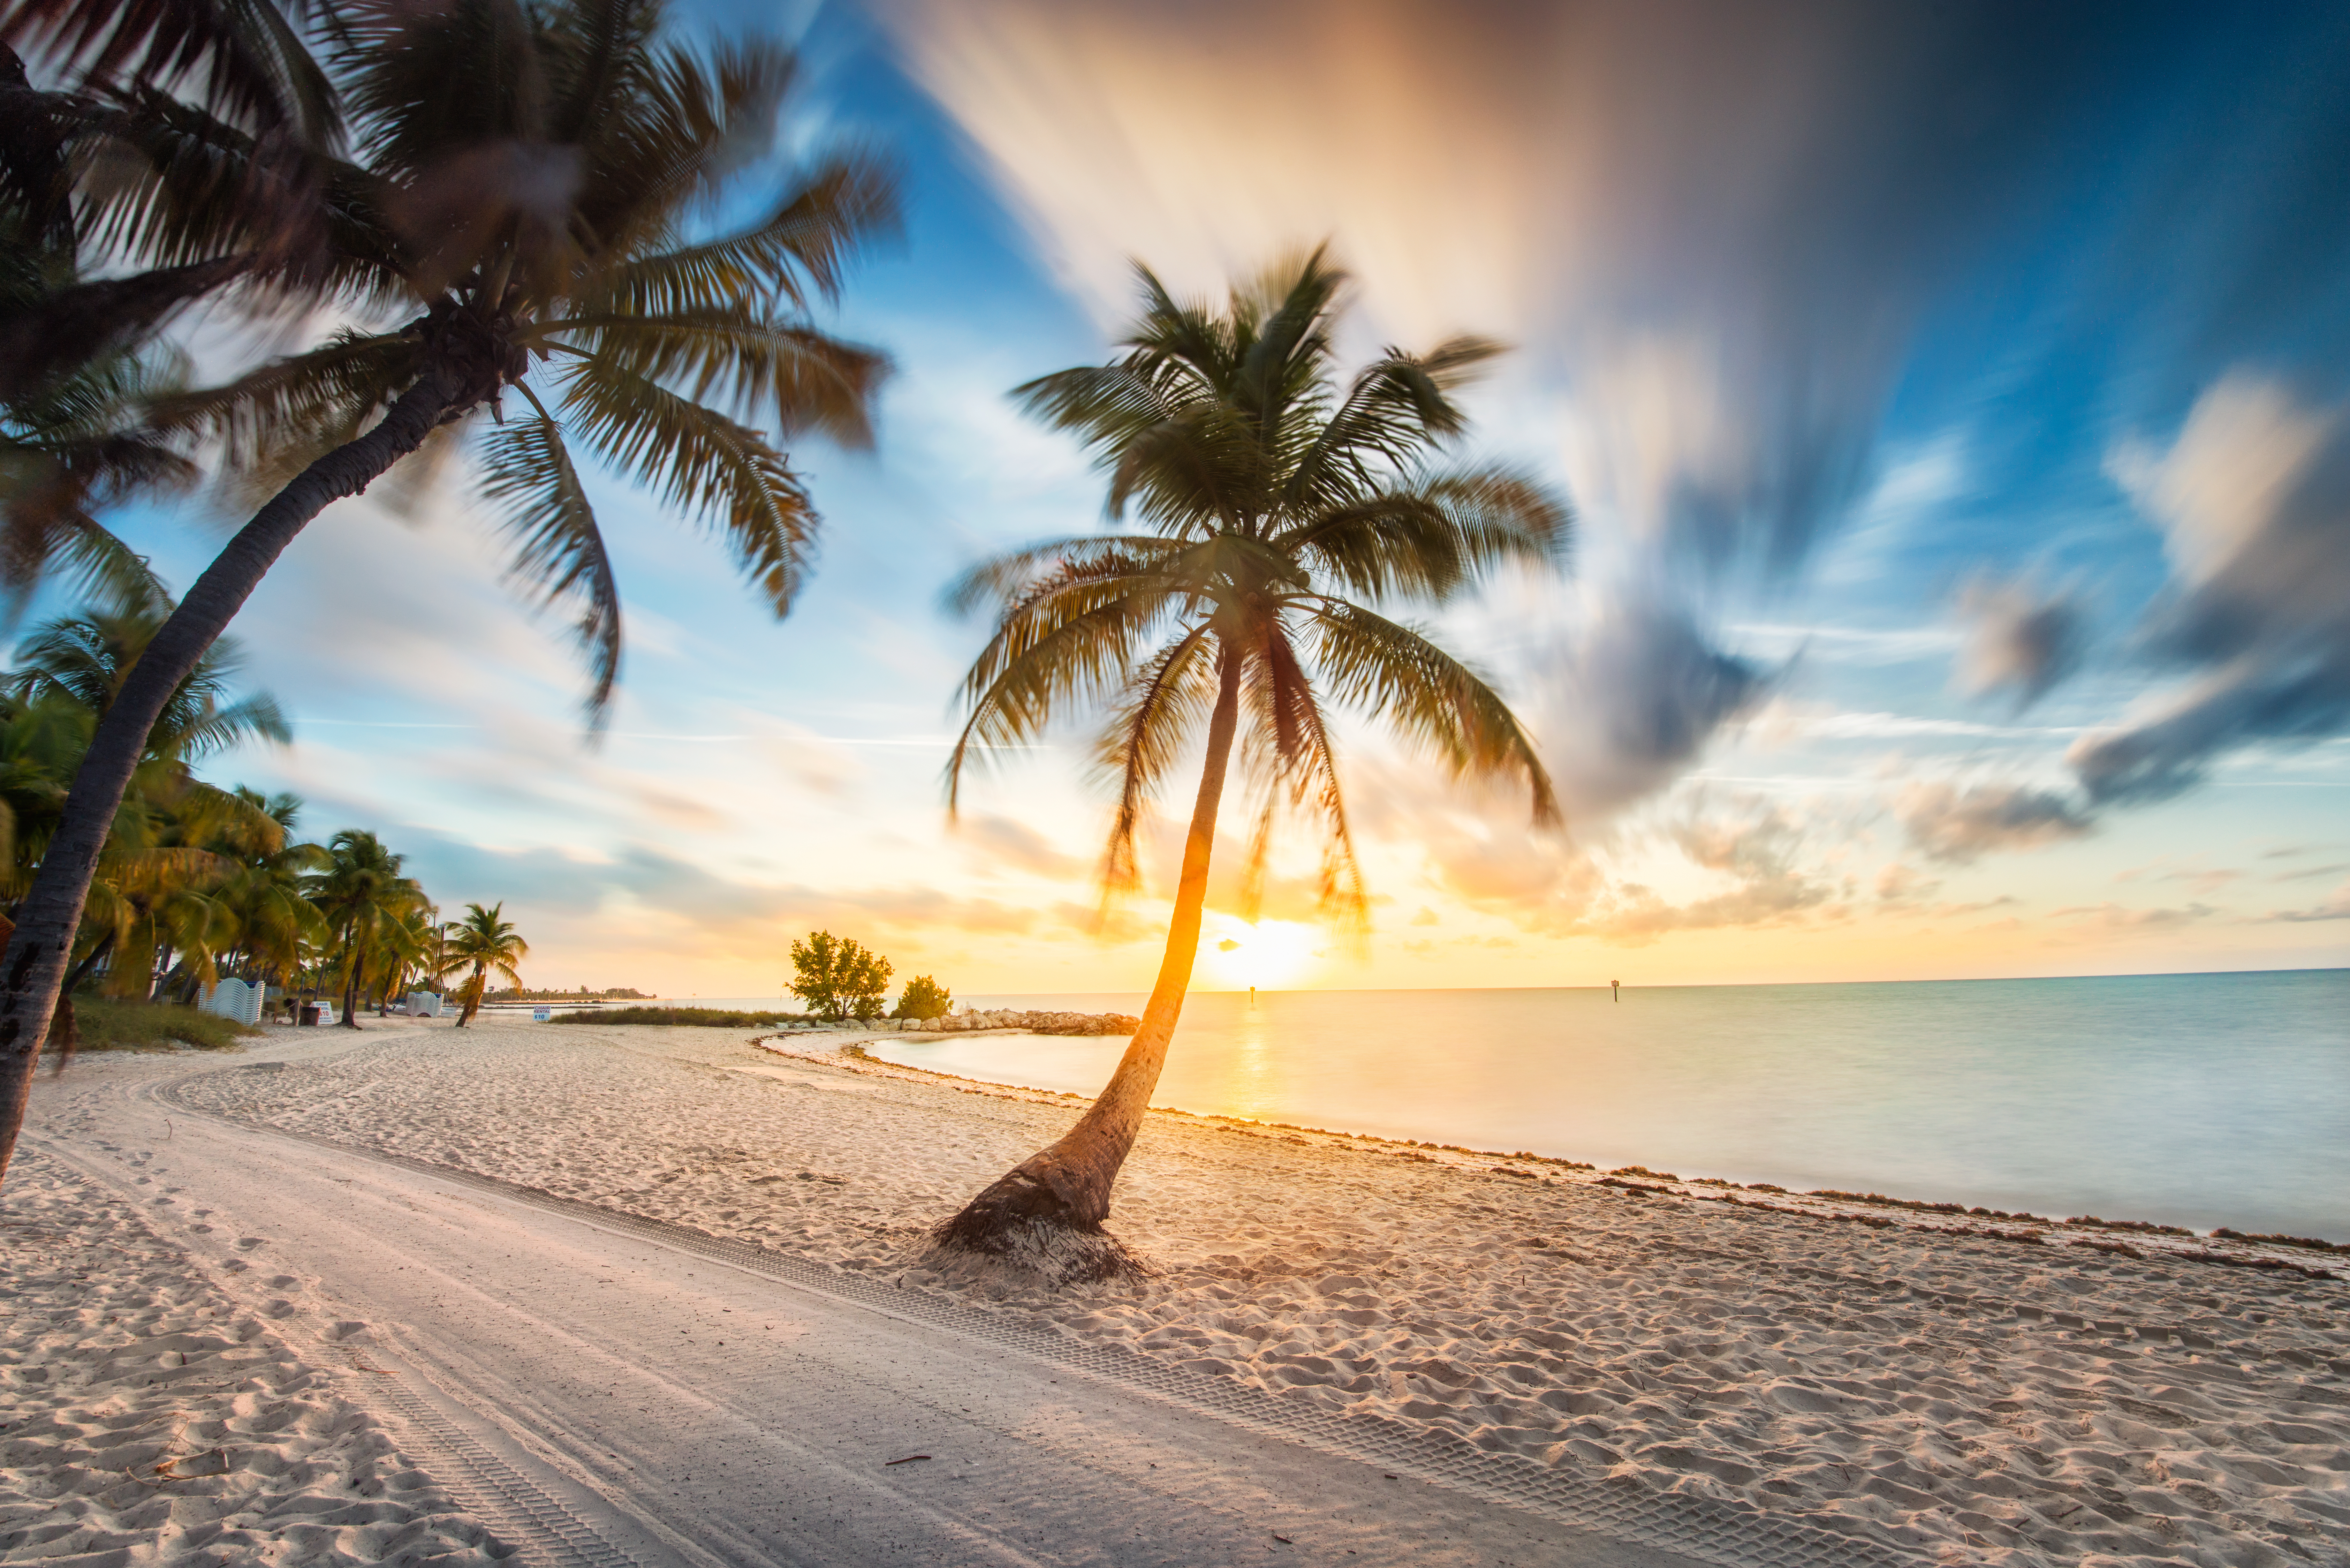 Flight Deal: Chicago To Florida Only $75 Round-Trip